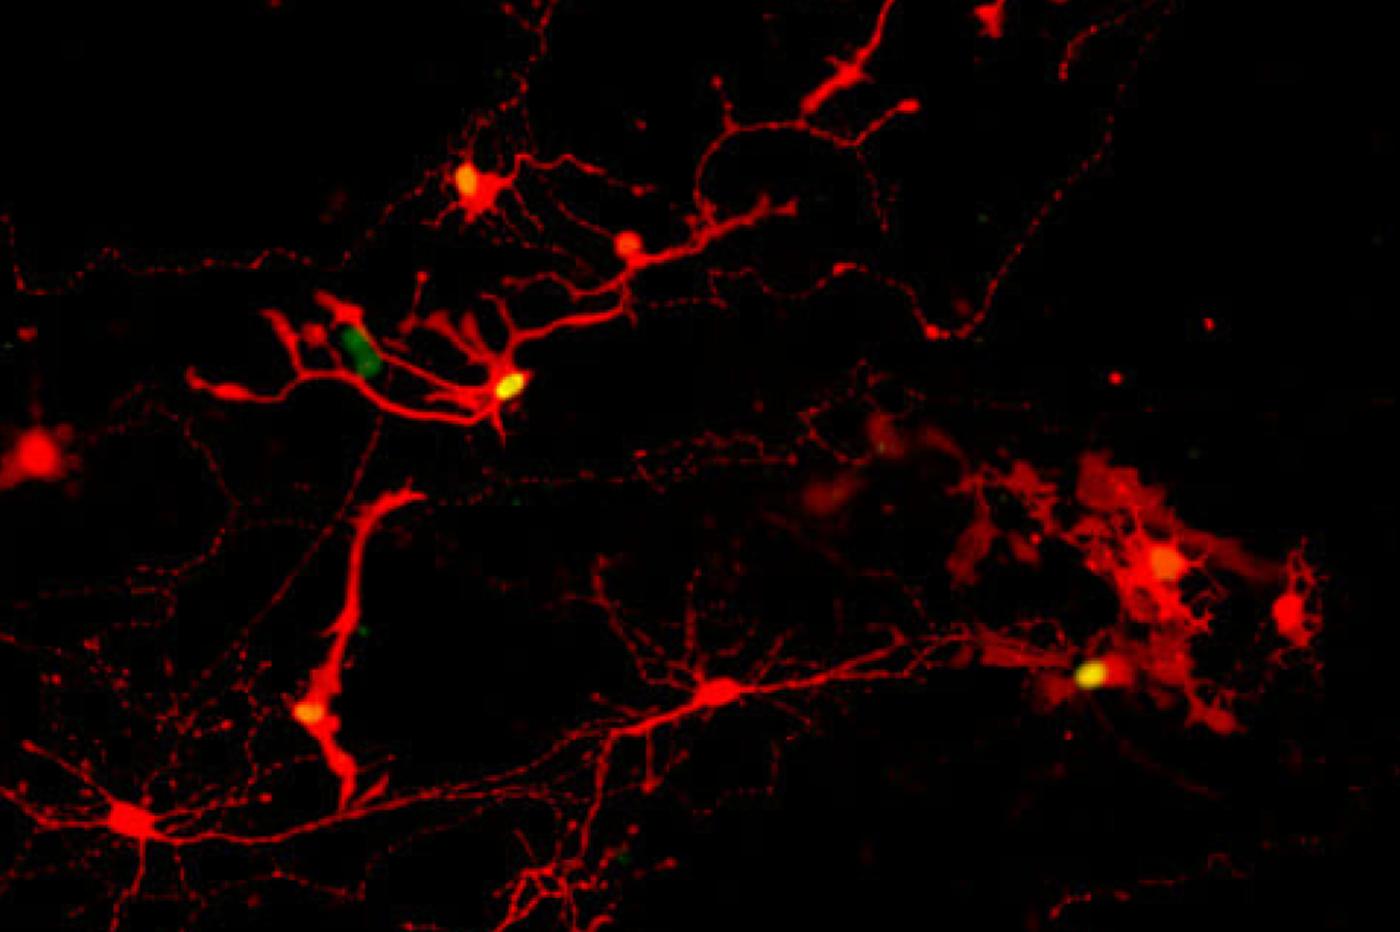 the team observed fluorescent dots which show that nerve cells can communicate